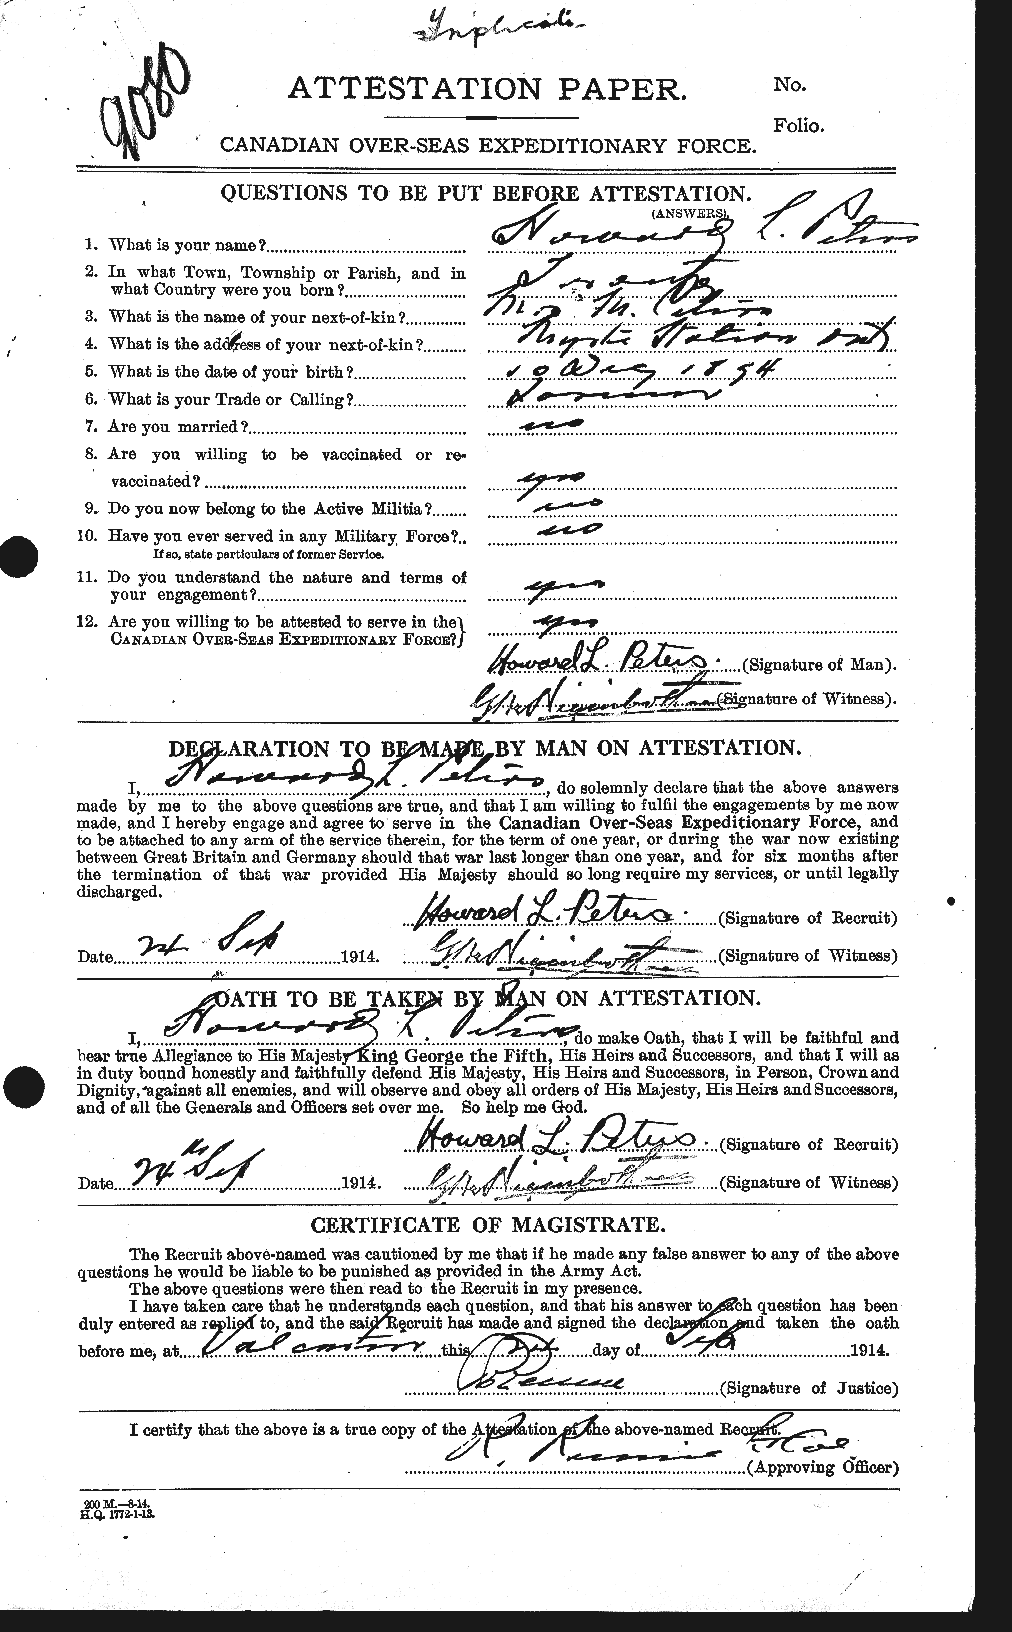 Personnel Records of the First World War - CEF 575504a